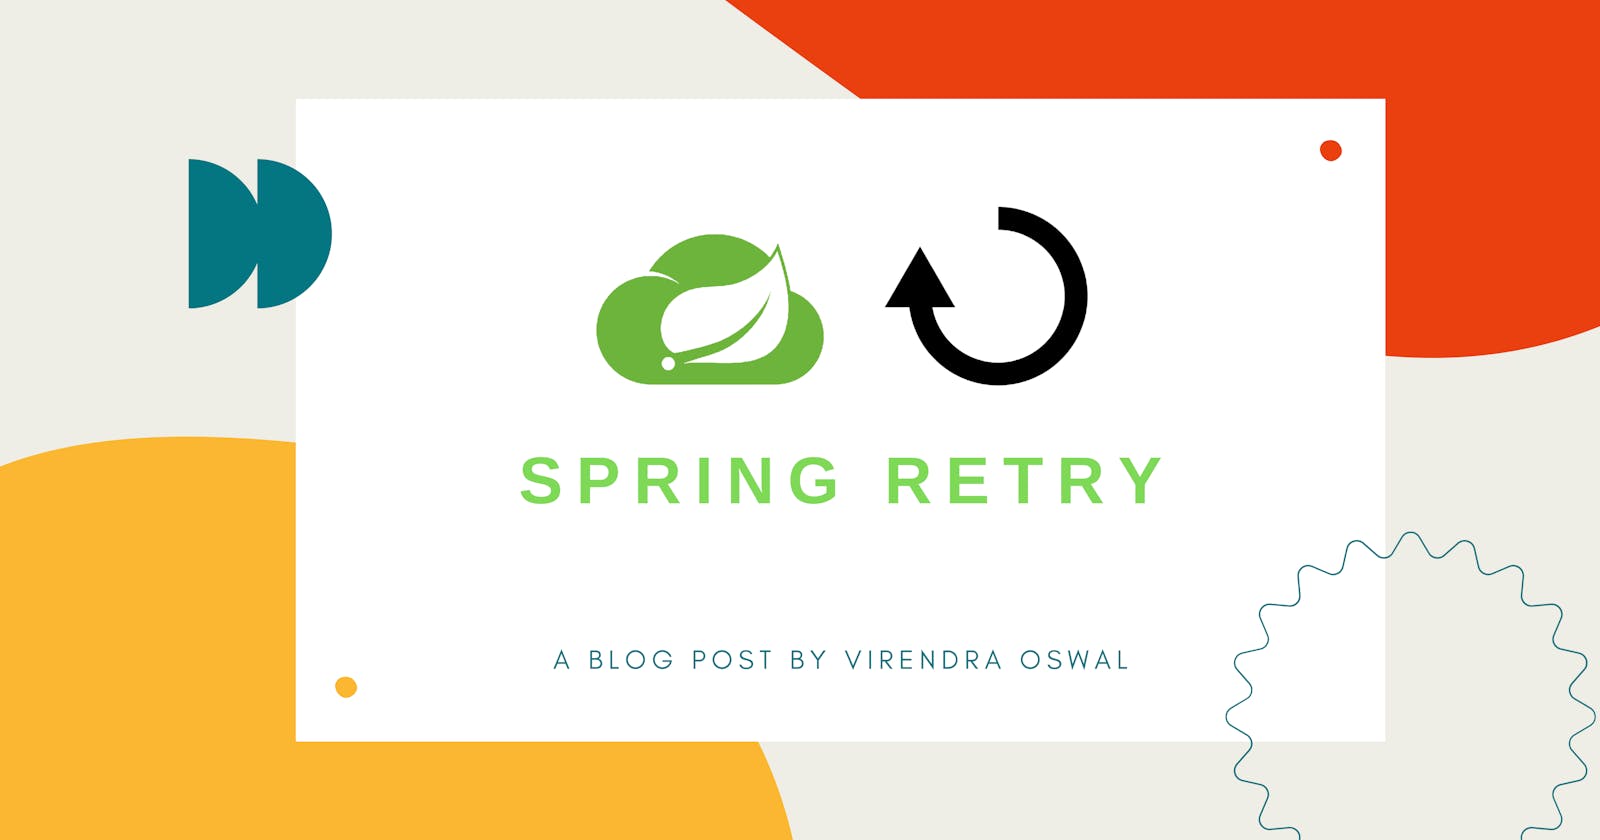 spring retry - Cleaner and declarative approach